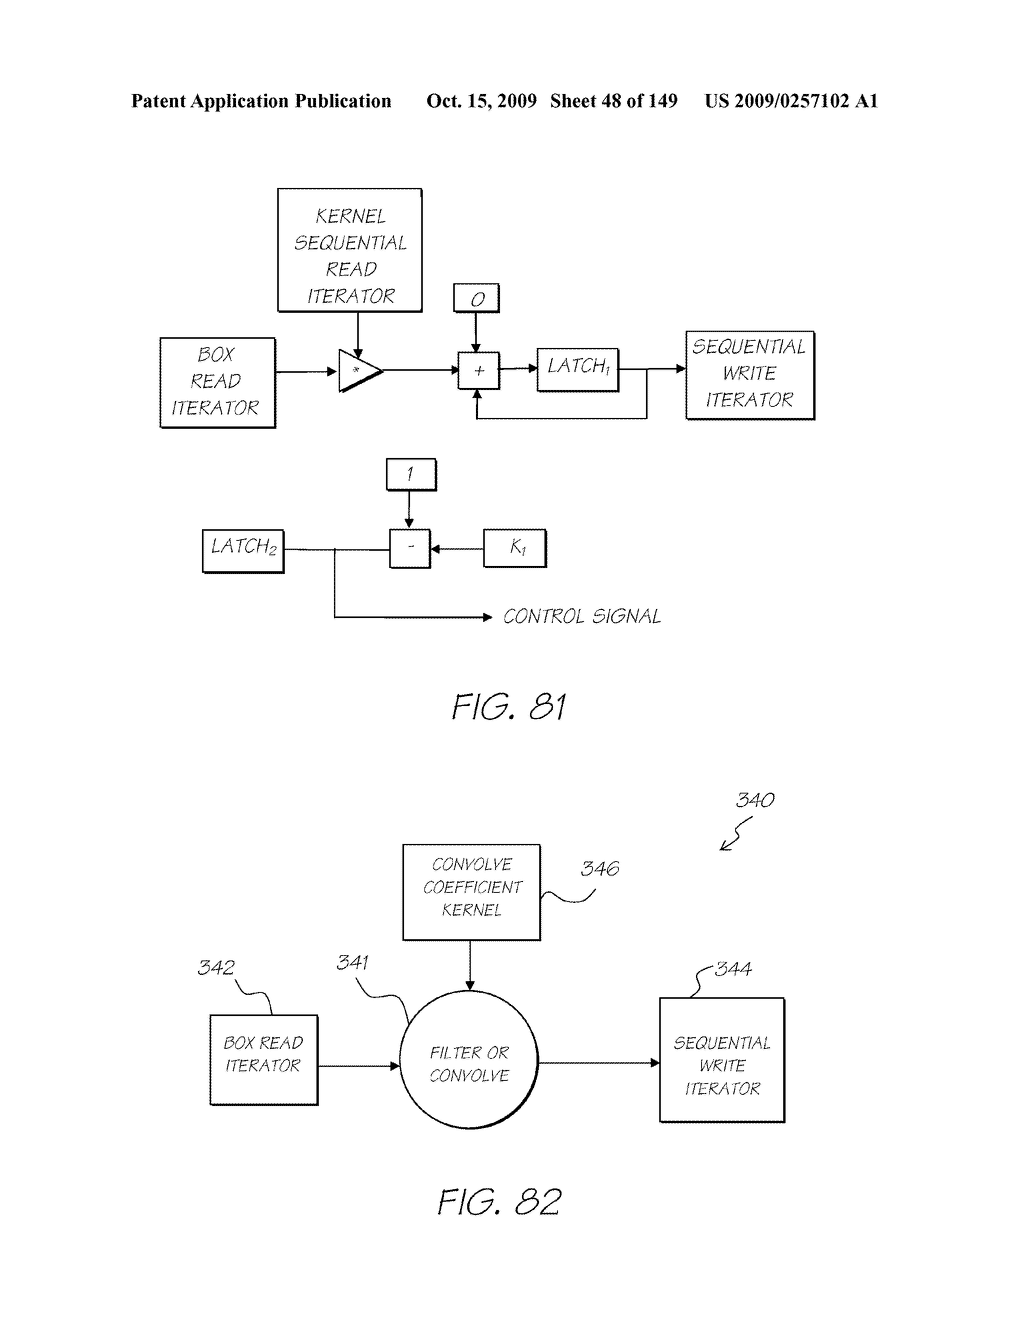 IMAGE PROCESSING APPARATUS HAVING CARD READER FOR APPLYING EFFECTS STORED ON A CARD TO A STORED IMAGE - diagram, schematic, and image 49